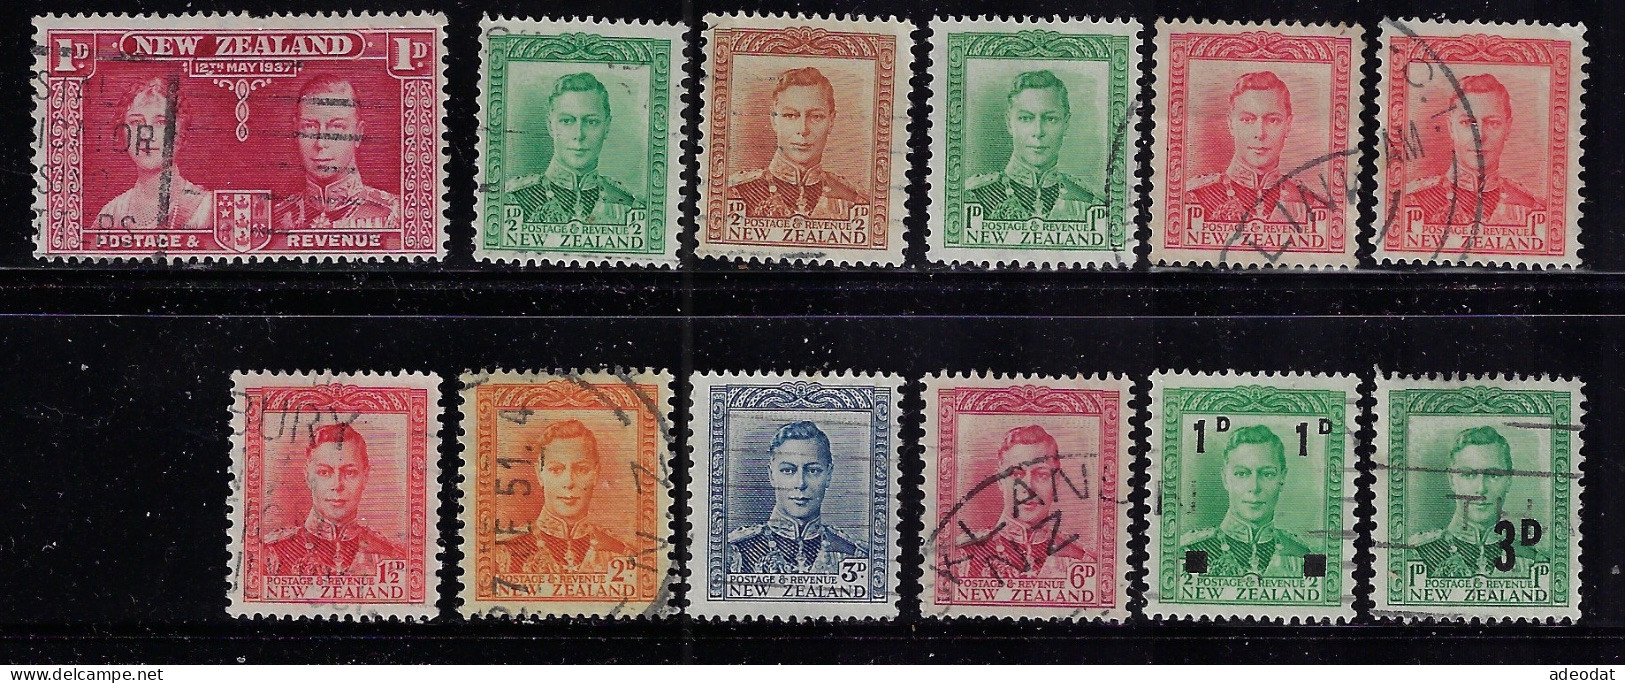 NEW ZEALAND 1937-41 QUEEN ELISABETH And KING GEORGE VI  SCOTT #223,226...228C ,USED - Used Stamps